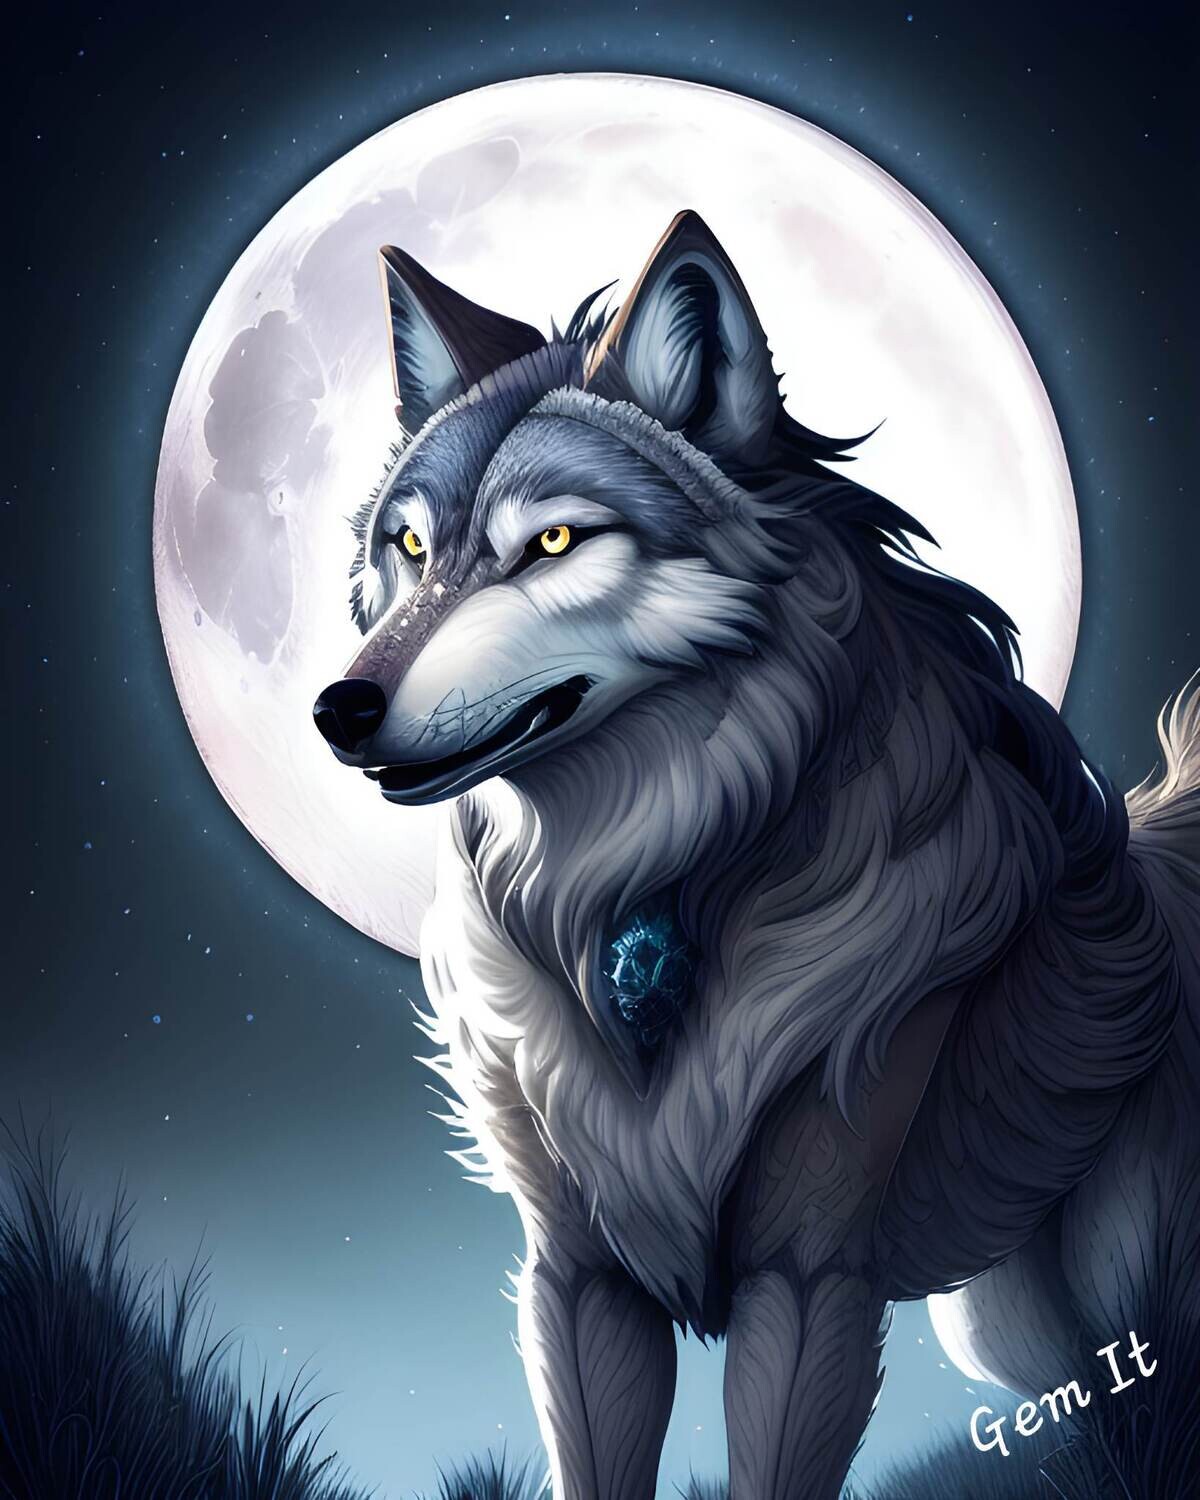 Full Moon Wolf 606- Specially ordered for you. Delivery is approximately 4 - 6 weeks.